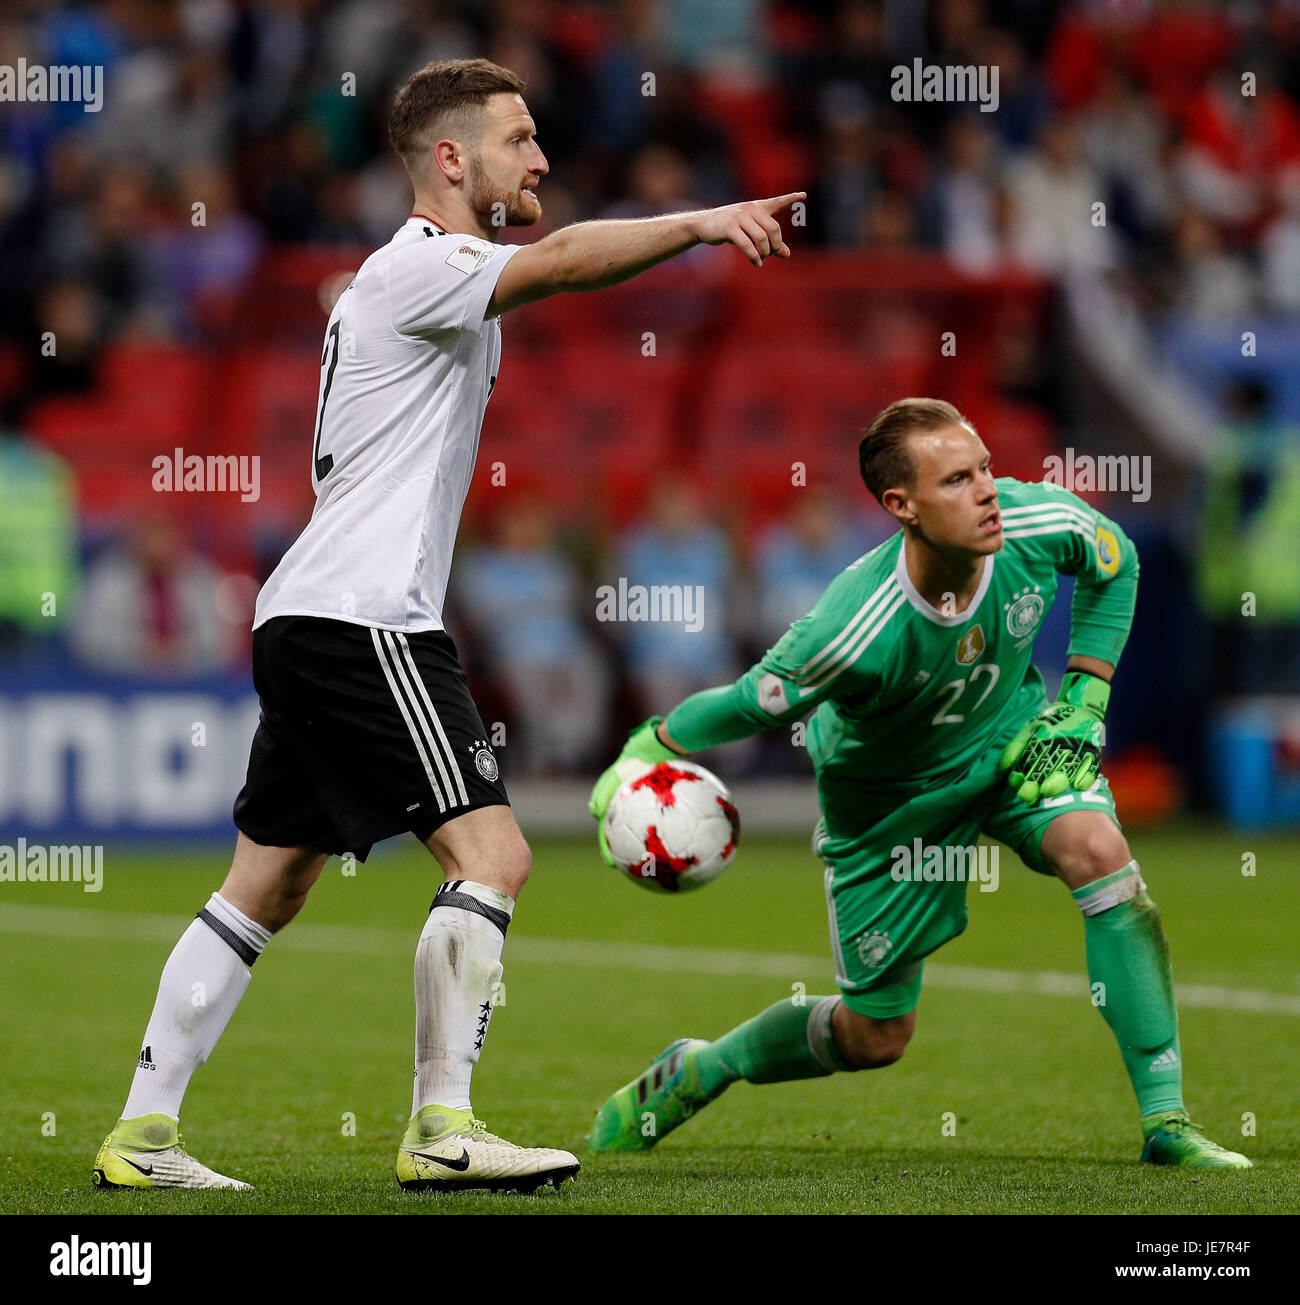 Kazan, Russia. 22nd Jun, 2017. MUSTAFI Shkodran from Germany and TER STEGEN Marc-Andre from Germany during a match between Germany and Chile valid for the second round of the 2017 Confederations Cup on Thursday (22) held at the Kazan Arena in Kazan, Russia. Credit: Foto Arena LTDA/Alamy Live News Stock Photo